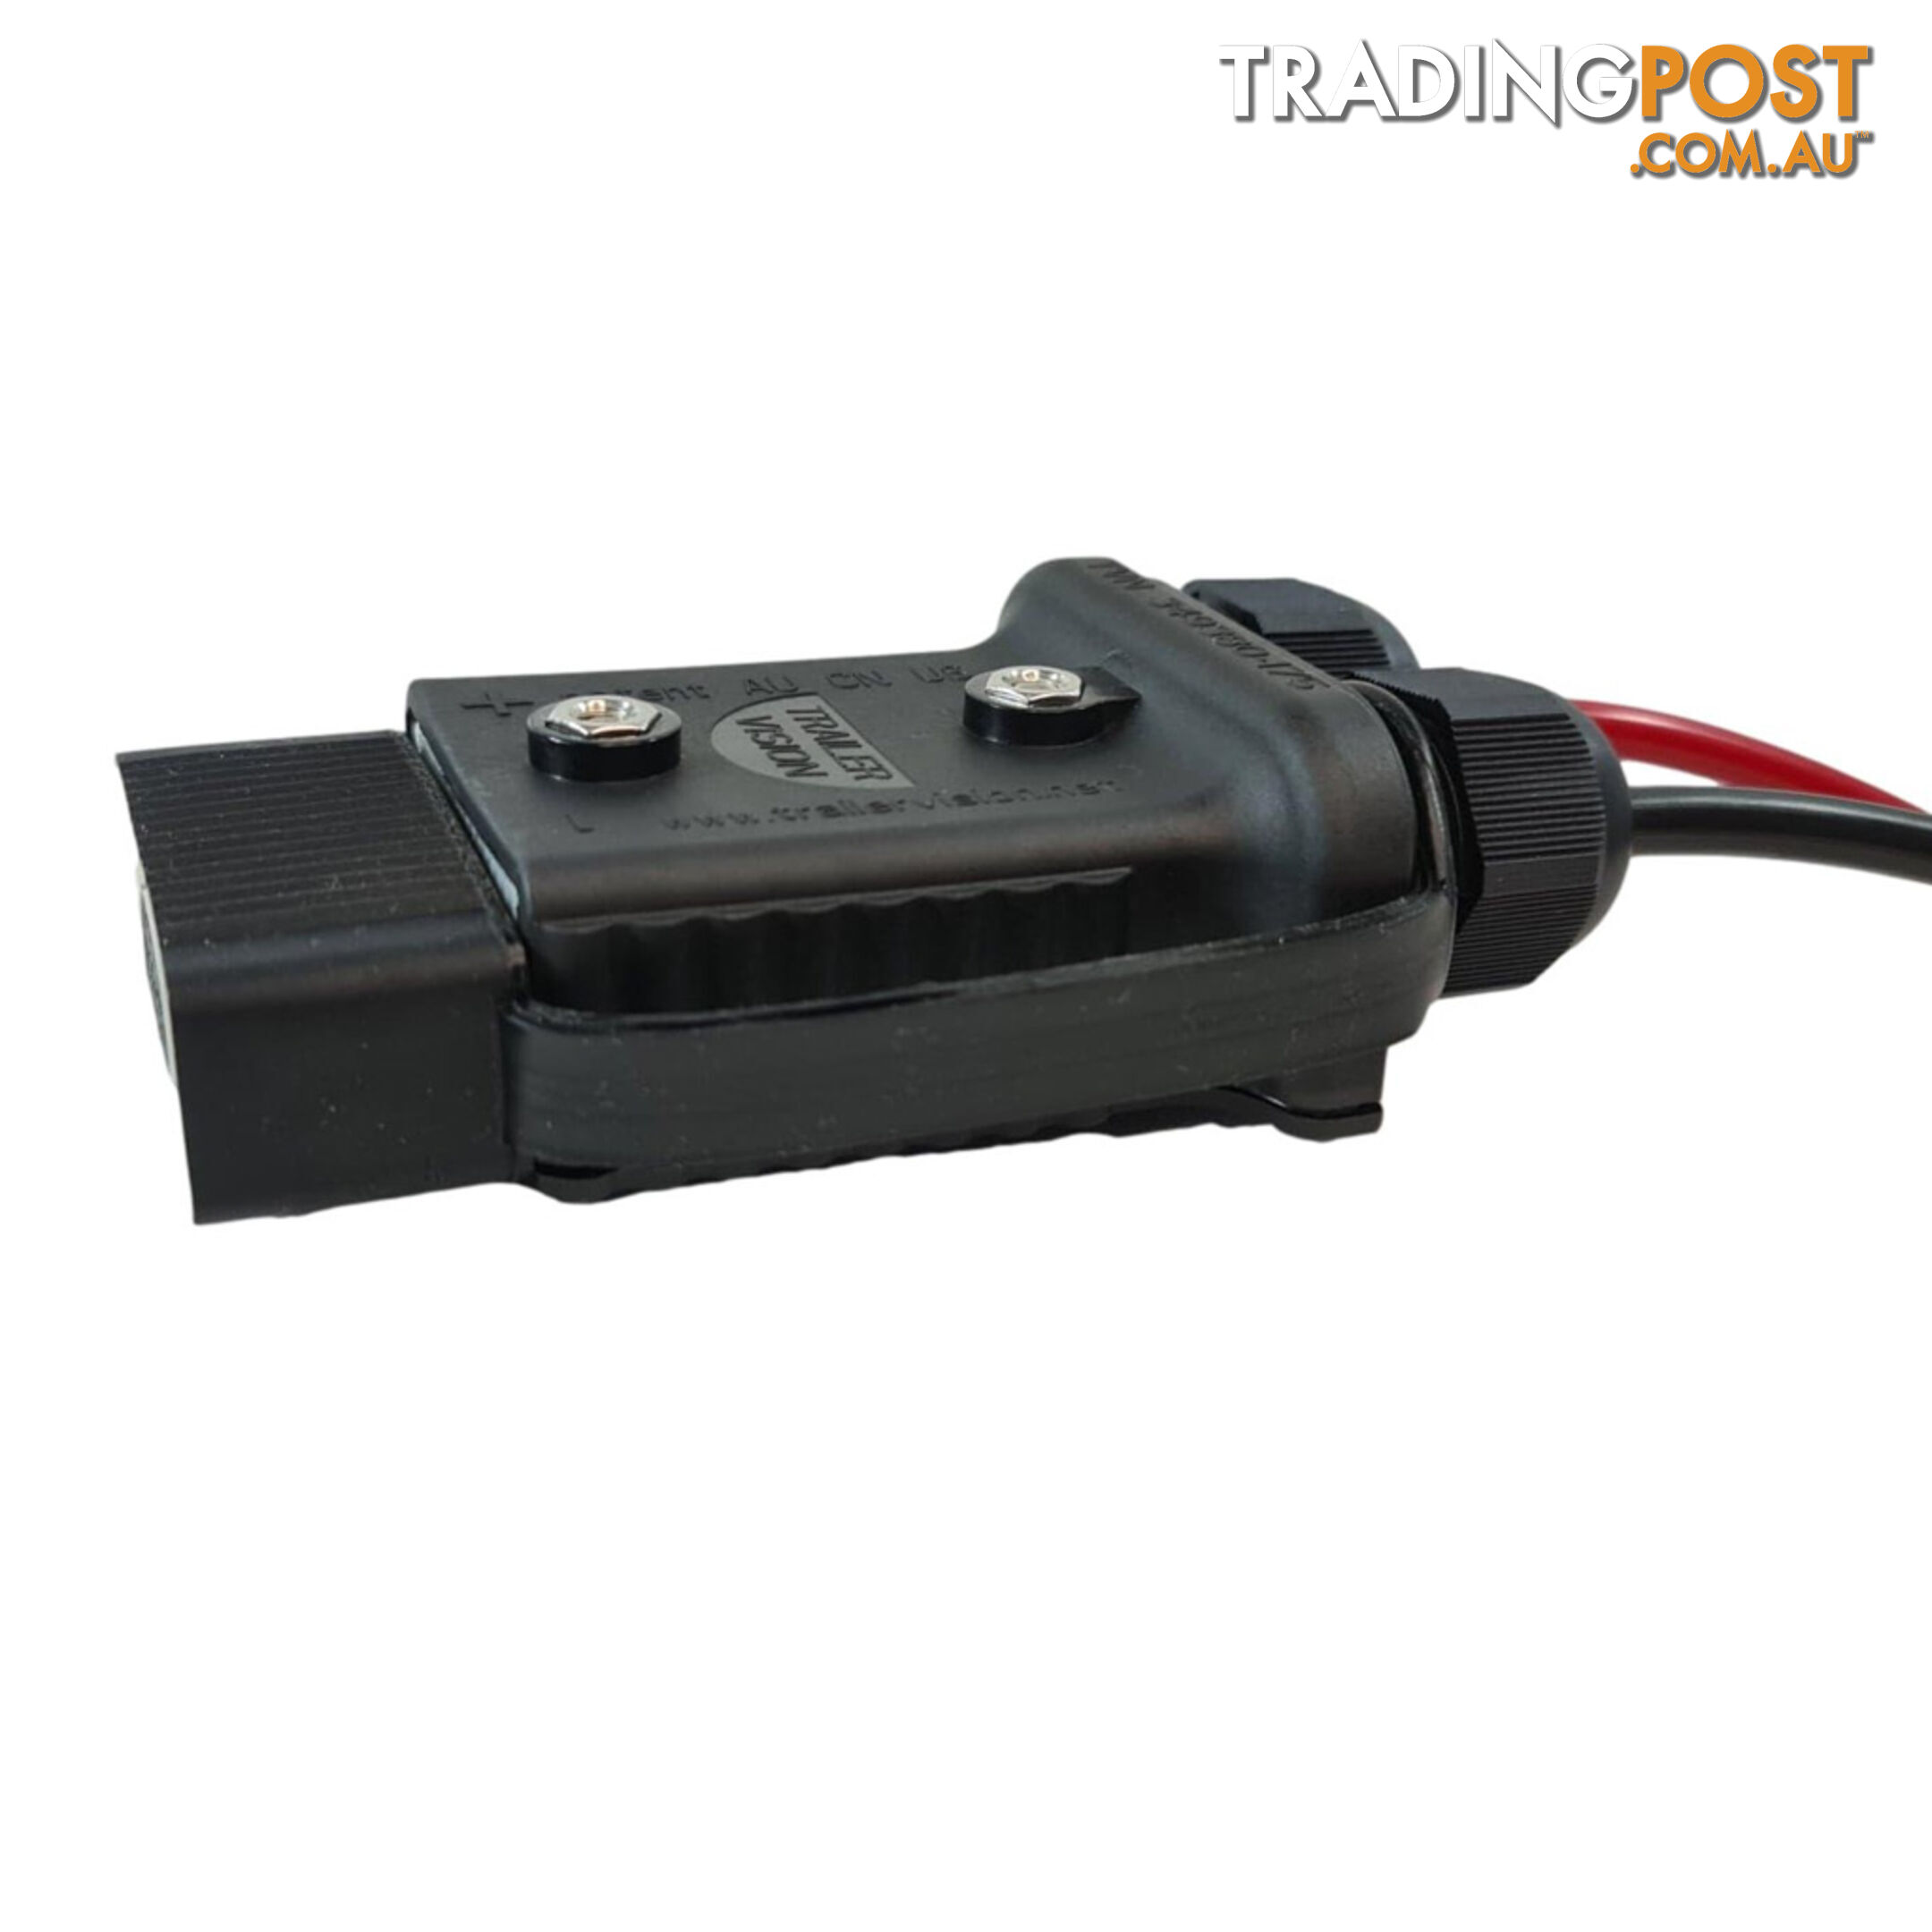 Trailer Vision 175 amp Anderson Plug Cover Assembly with LED Power Indicator SKU - TVN349380-175